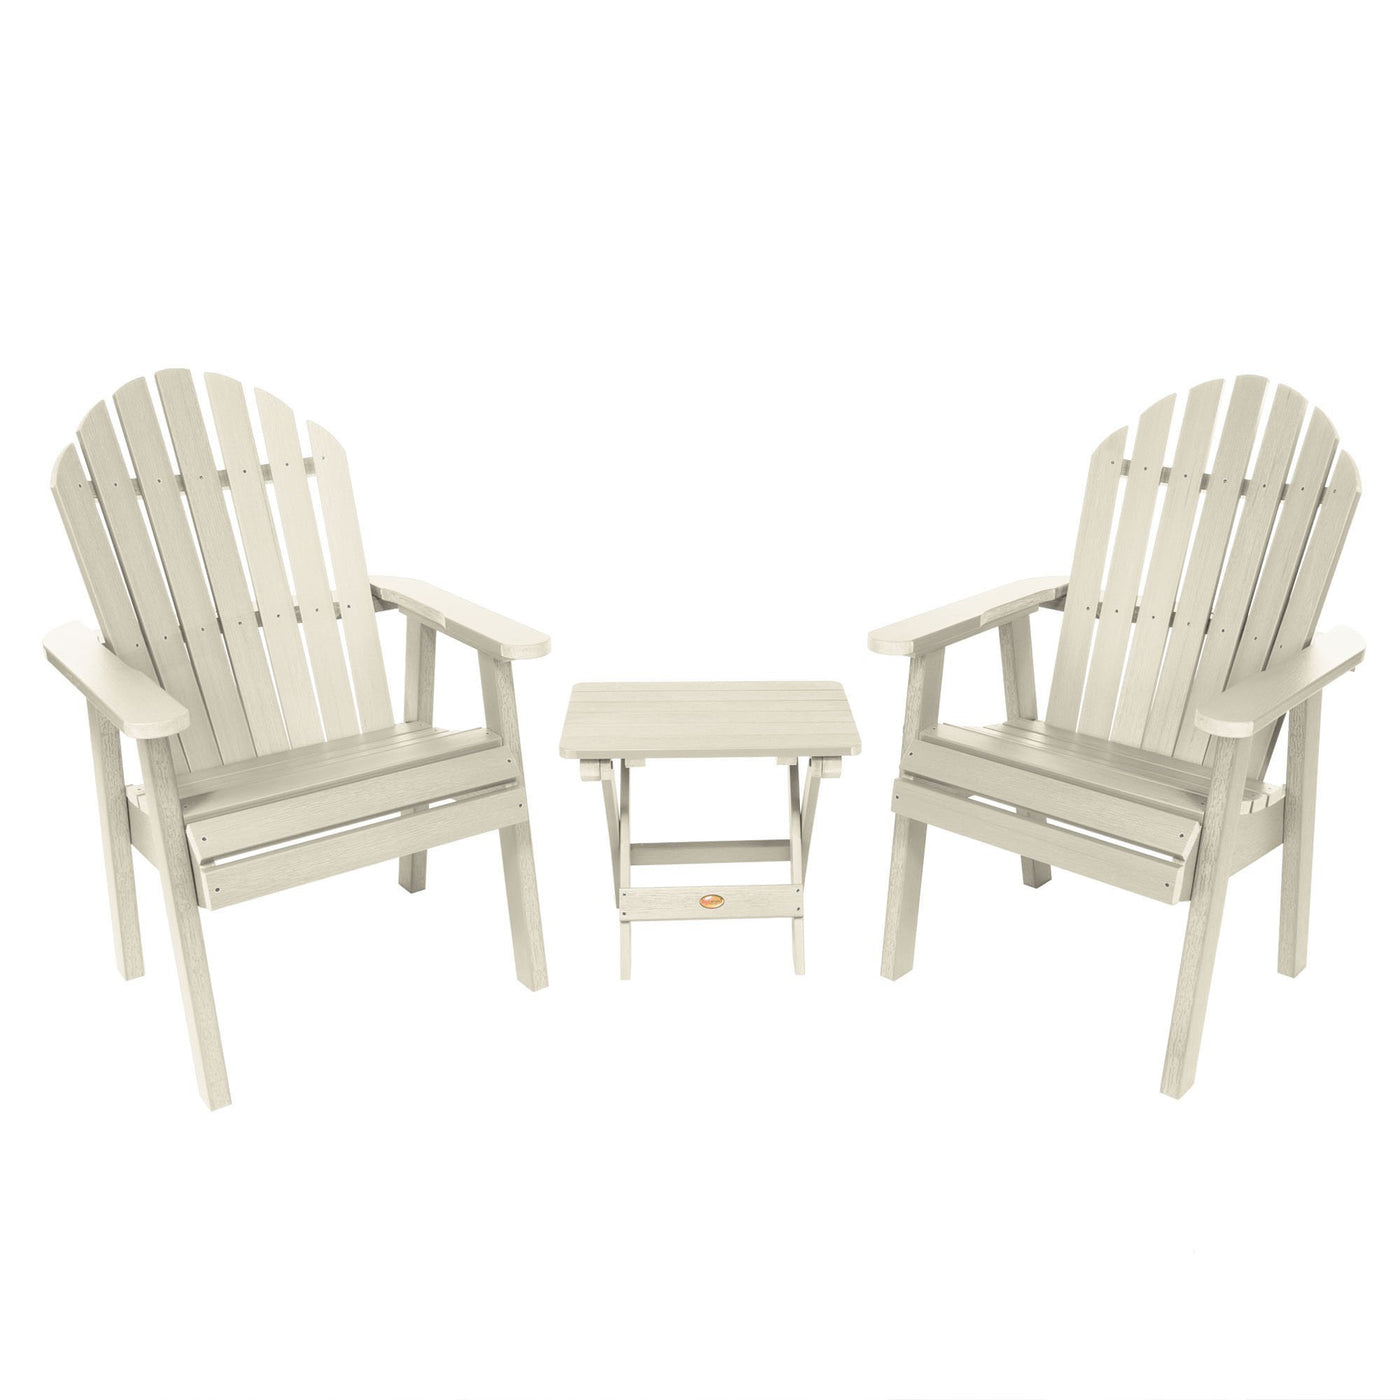 2 Hamilton Deck Chairs with Folding Side Table Highwood USA Whitewash 